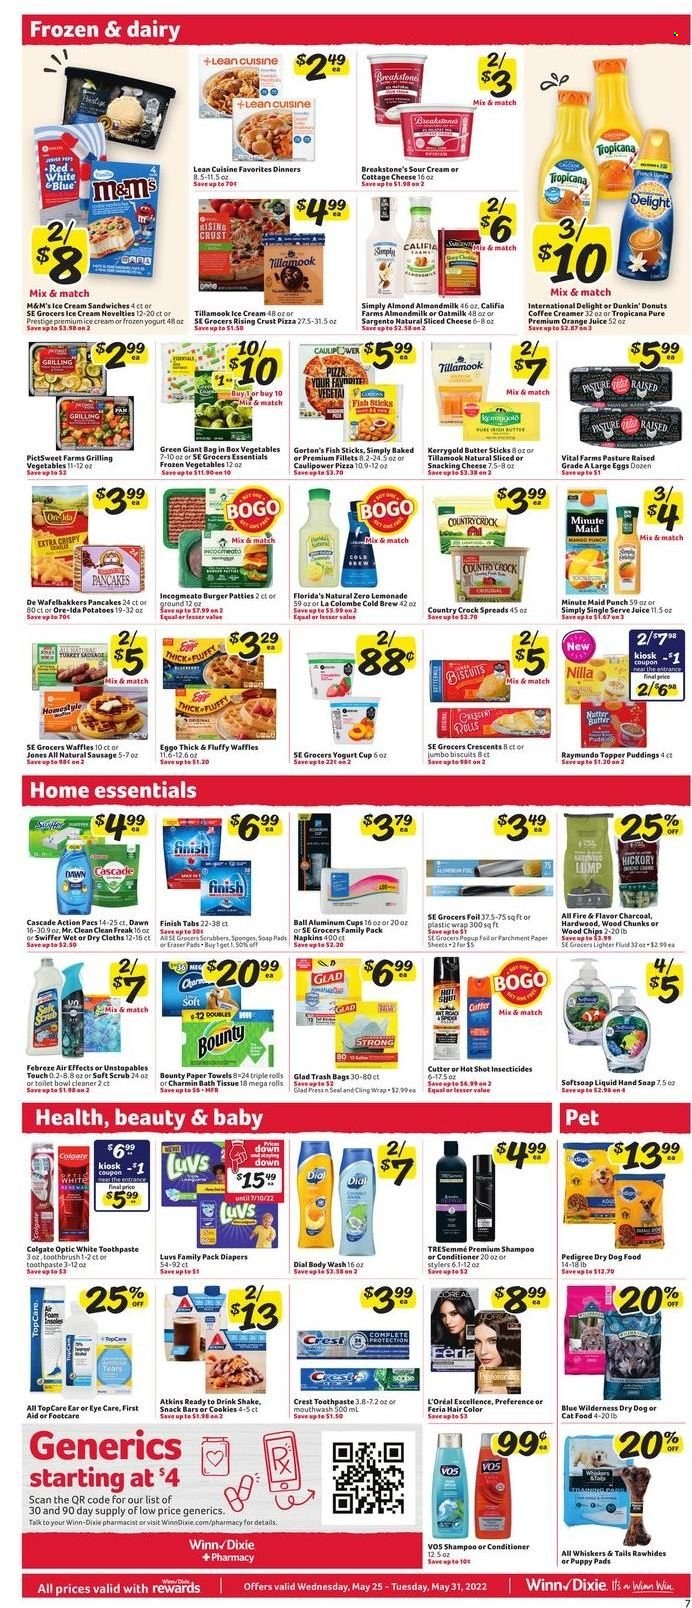 thumbnail - Winn Dixie Flyer - 05/25/2022 - 05/31/2022 - Sales products - waffles, Dunkin' Donuts, potatoes, mango, fish, fish fingers, Gorton's, fish sticks, pizza, hamburger, pancakes, Lean Cuisine, sausage, cottage cheese, sliced cheese, Sargento, pudding, yoghurt, almond milk, shake, oat milk, large eggs, butter, sour cream, creamer, ice cream, ice cream sandwich, frozen vegetables, Ore-Ida, cookies, snack, Bounty, M&M's, biscuit, snack bar, Florida's Natural, lemonade, orange juice, juice, fruit punch, burger patties, napkins, nappies, bath tissue, kitchen towels, paper towels, Charmin, Febreze, cleaner, Swiffer, Cascade, Unstopables, body wash, shampoo, Softsoap, hand soap, Dial, soap, Colgate, toothpaste, mouthwash, Crest, L’Oréal, conditioner, TRESemmé, hair color, trash bags, cup, eraser, cutter, animal food, dry dog food, puppy pads, cat food, dog food, Pedigree, Blue Wilderness. Page 7.